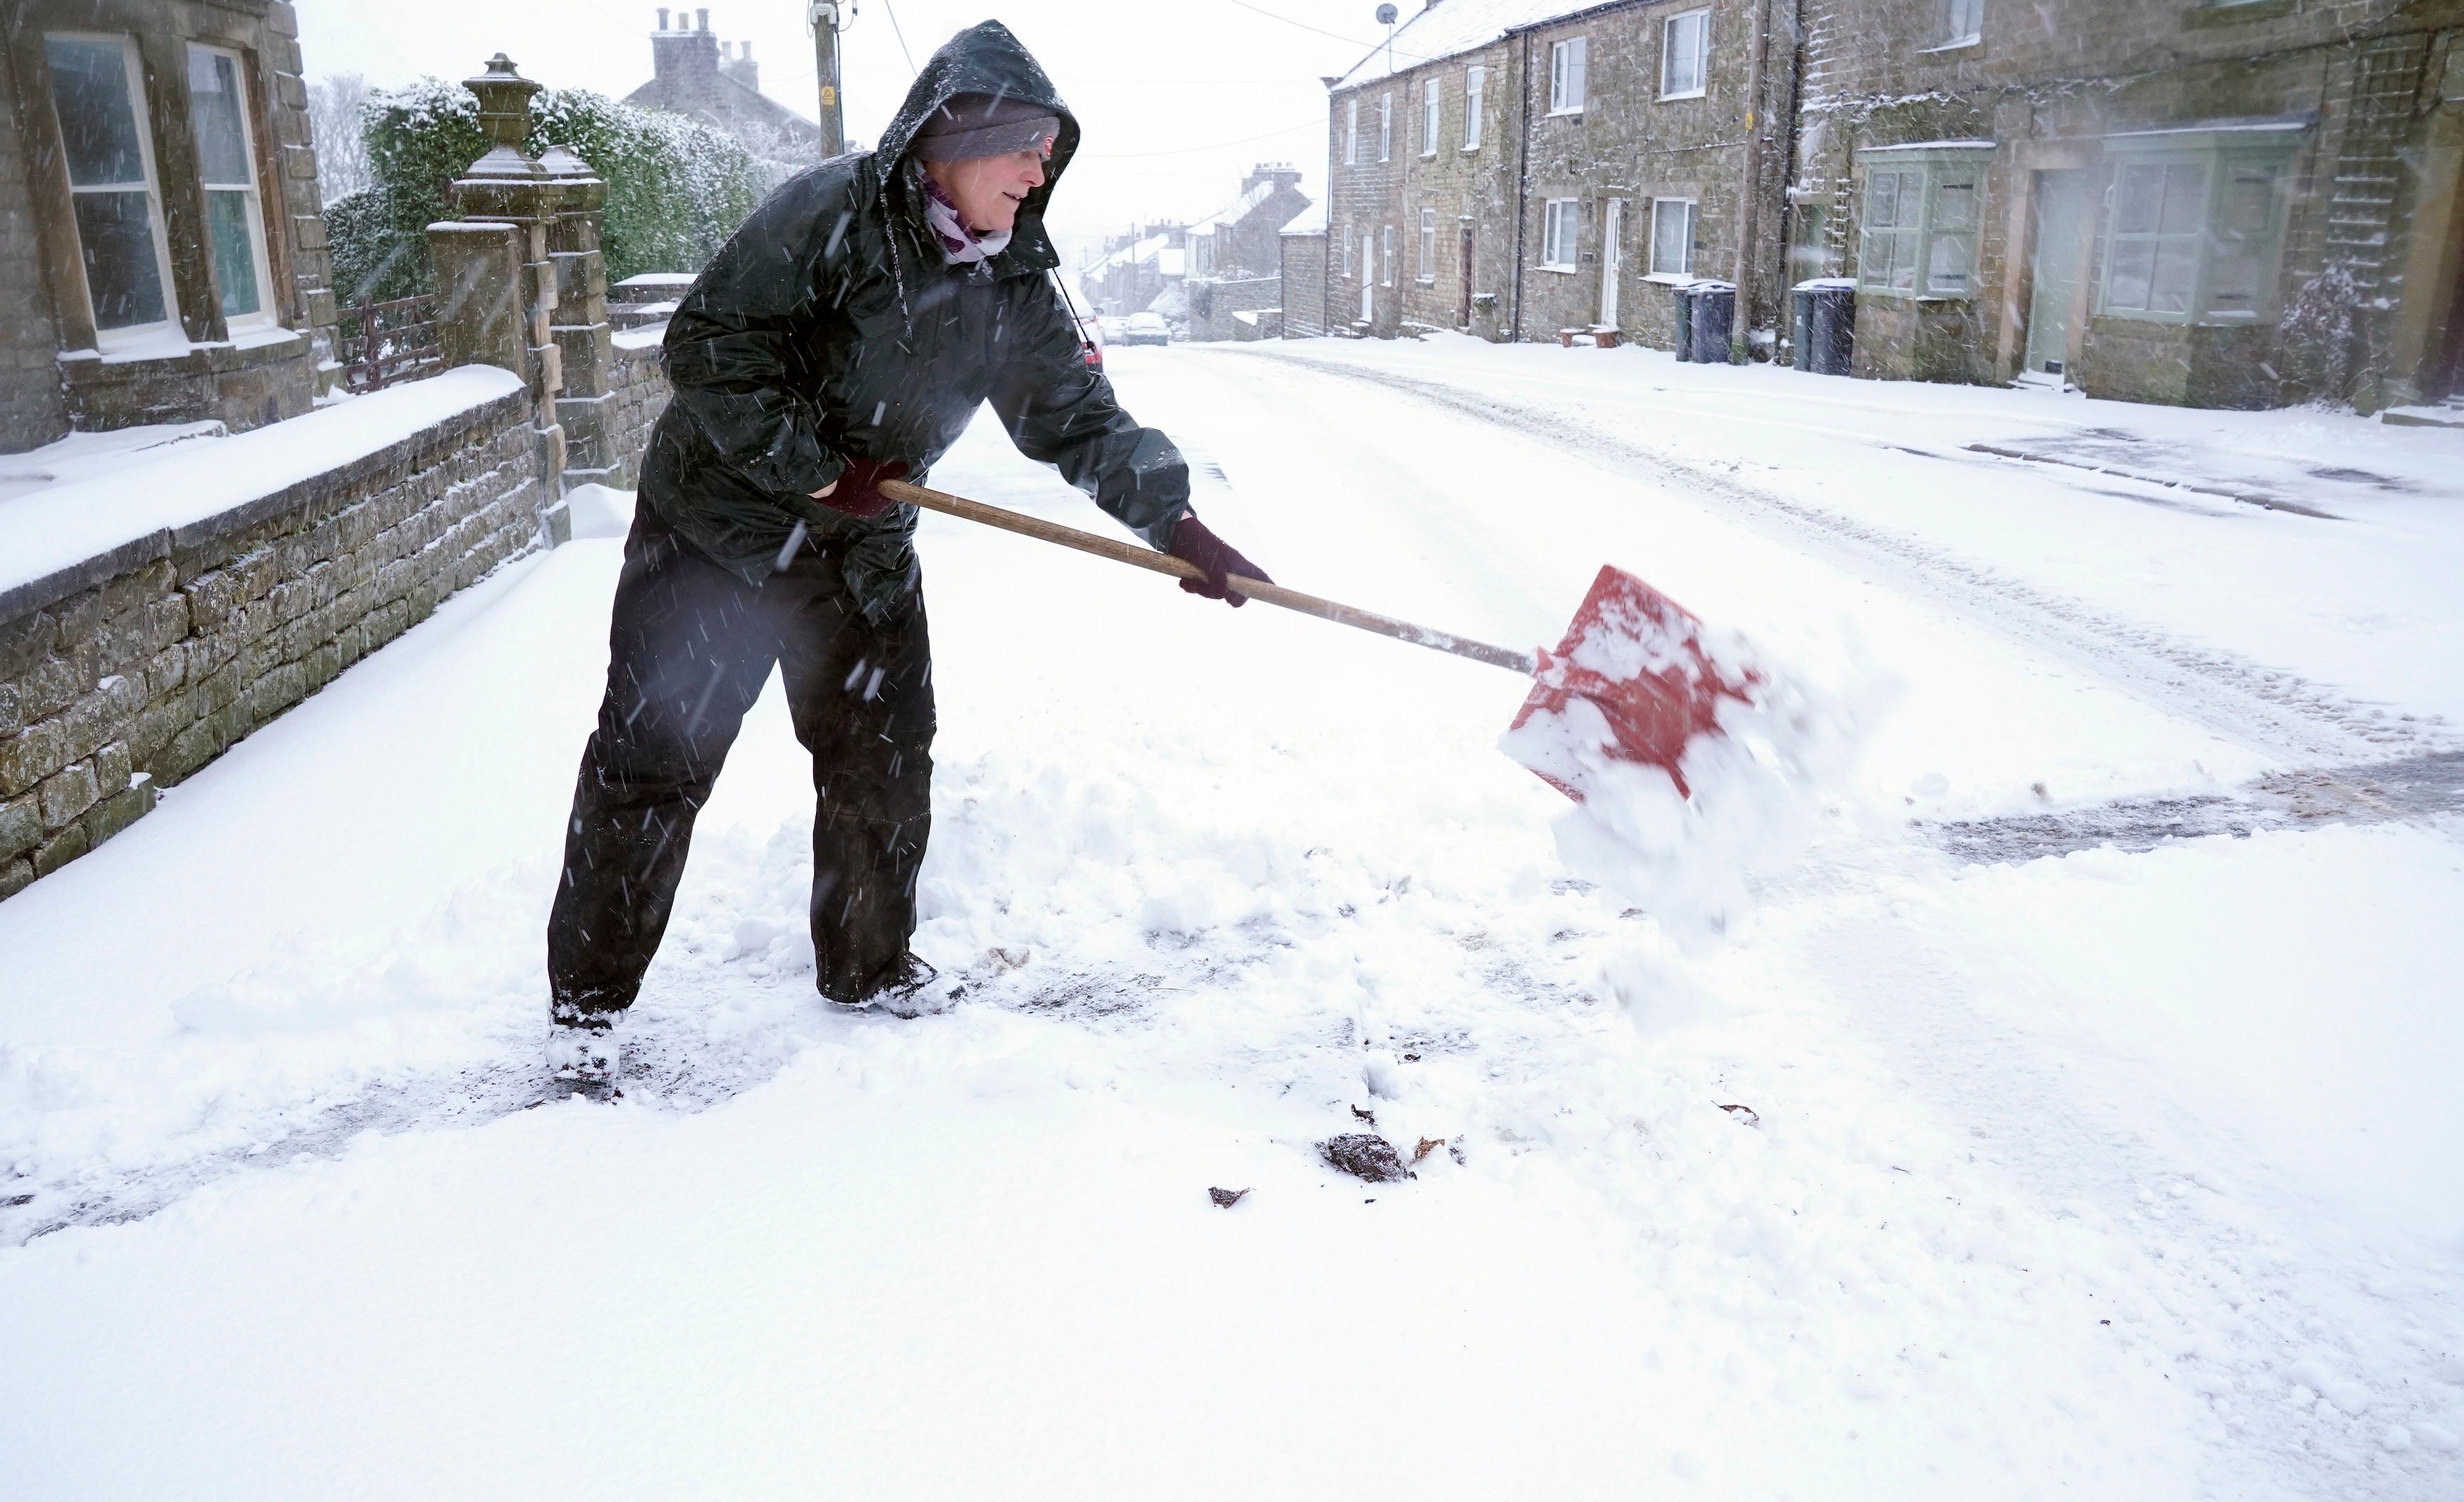 A woman clears her path in Bowes in County Durham as heavy snow falls.